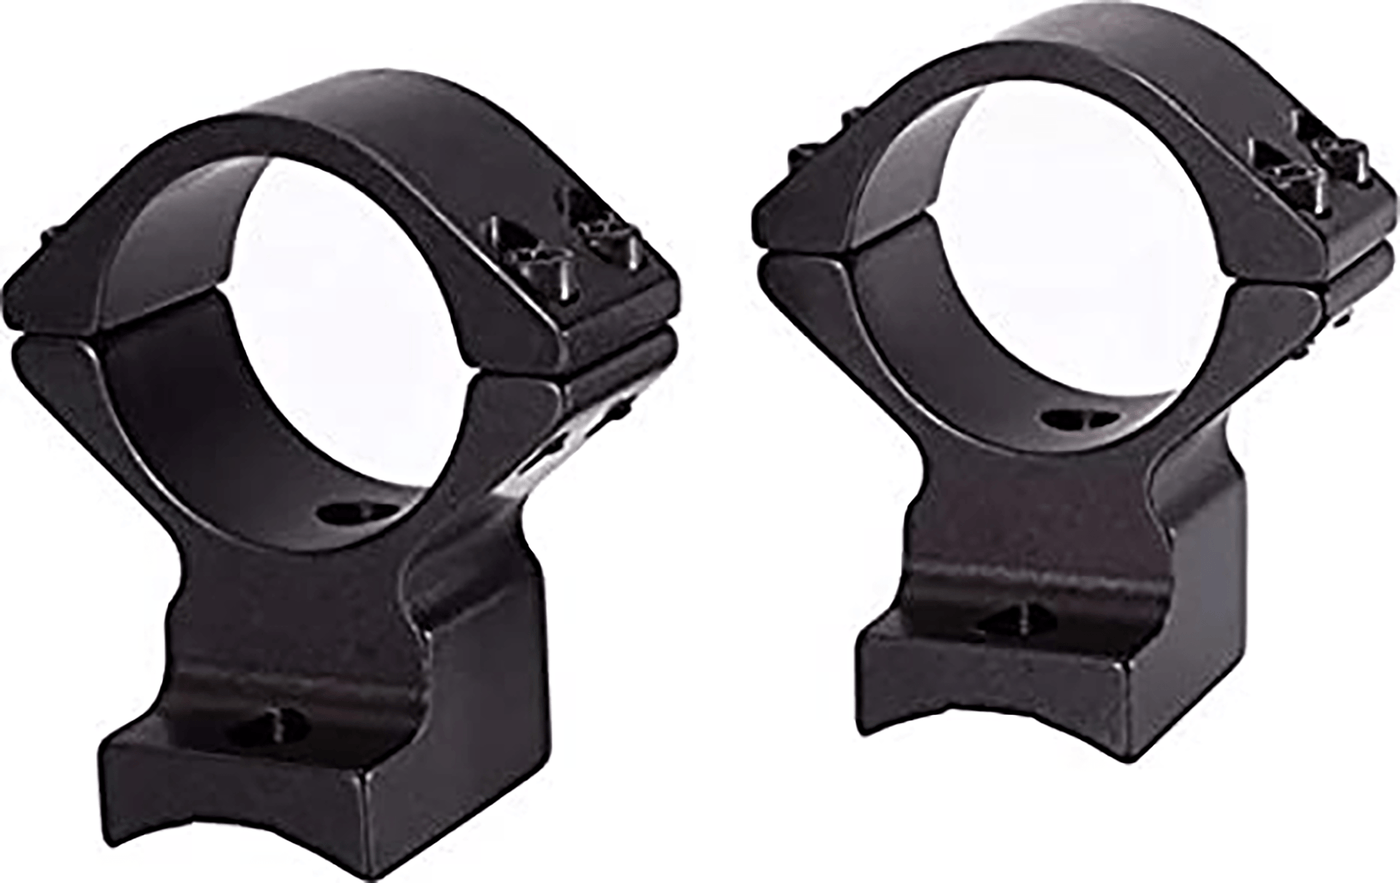 Talley Talley Scope Ring Set, Tal 730709    30mm 98 Mauser Lg Ring** Mauser M12 Optics Accessories